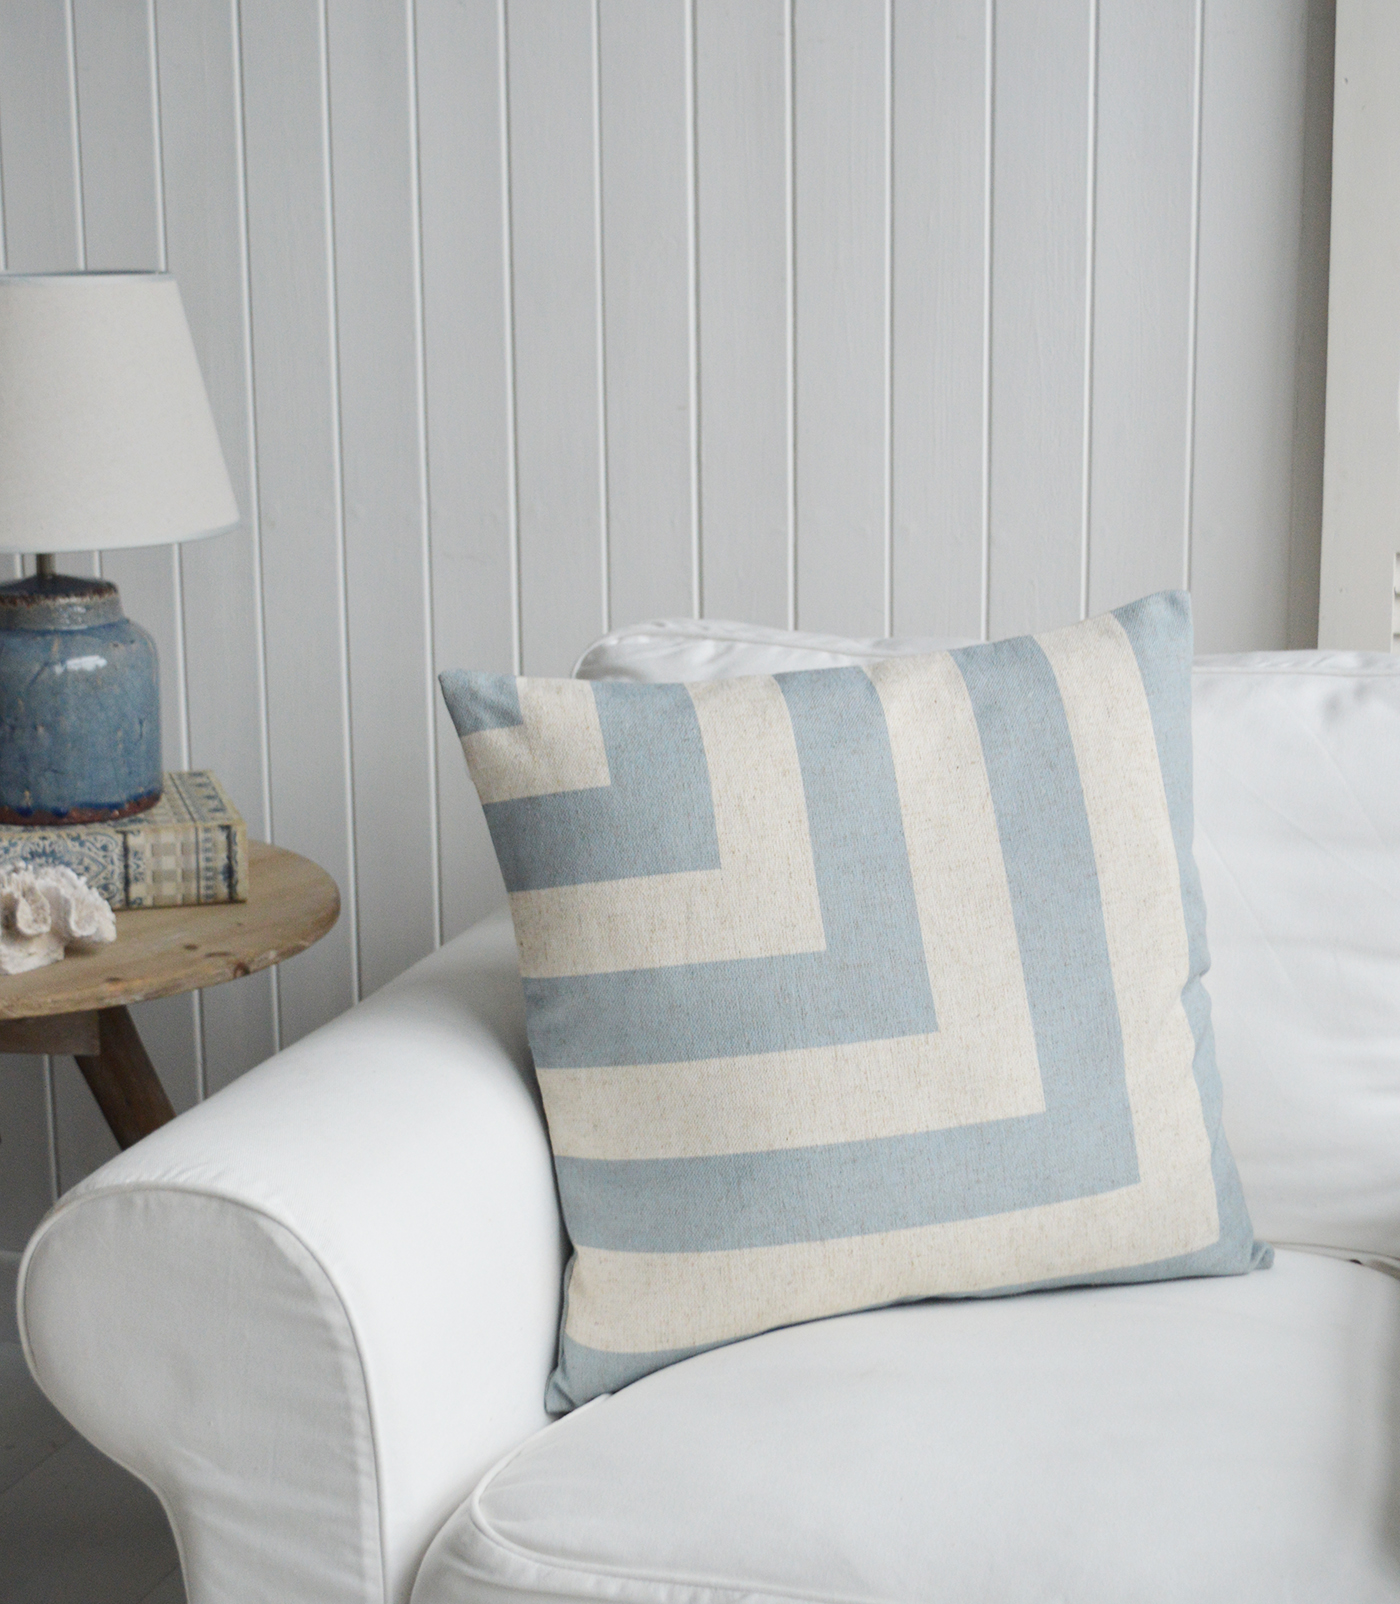 New England cushions and soft furnishing for coastal, modern country and farmhouse homes and interiors